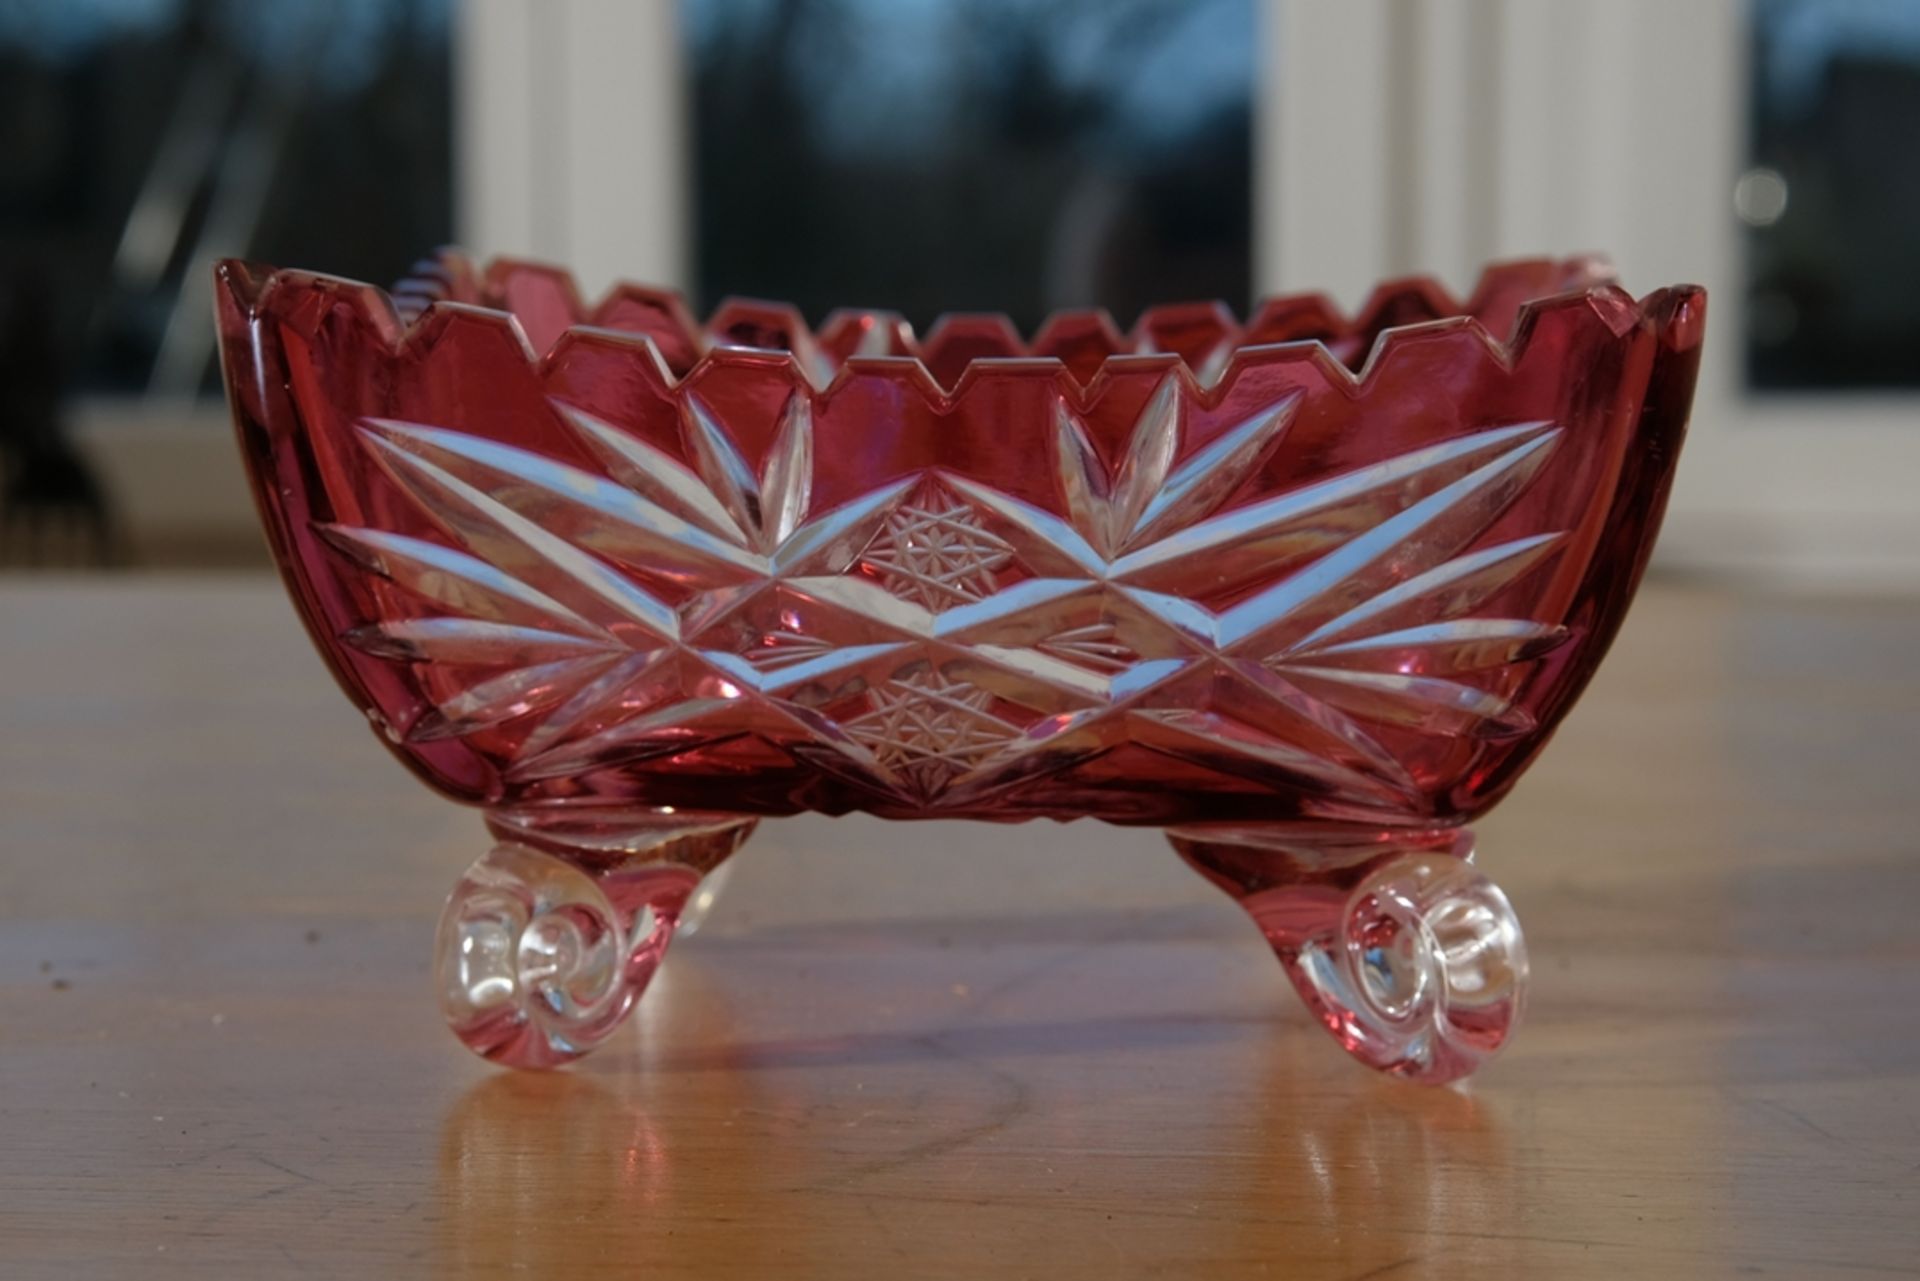 Glass bowl, probably Murano, red glass, engraved with floral ornaments, 16 x 16 x 9 cm.